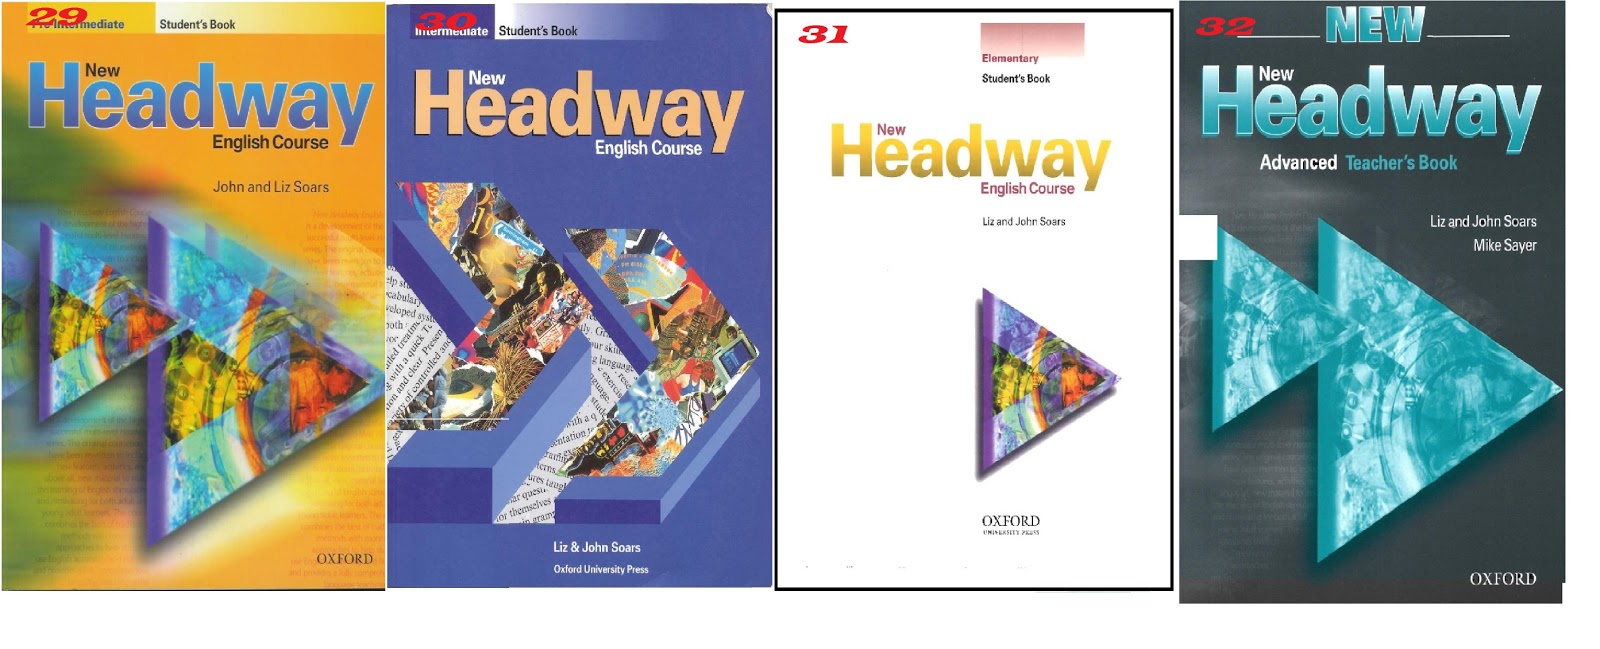 New headway test. Headway Elementary. Headway Elementary student's book. Учебник по английскому языку Headway. New Headway English course student's book.